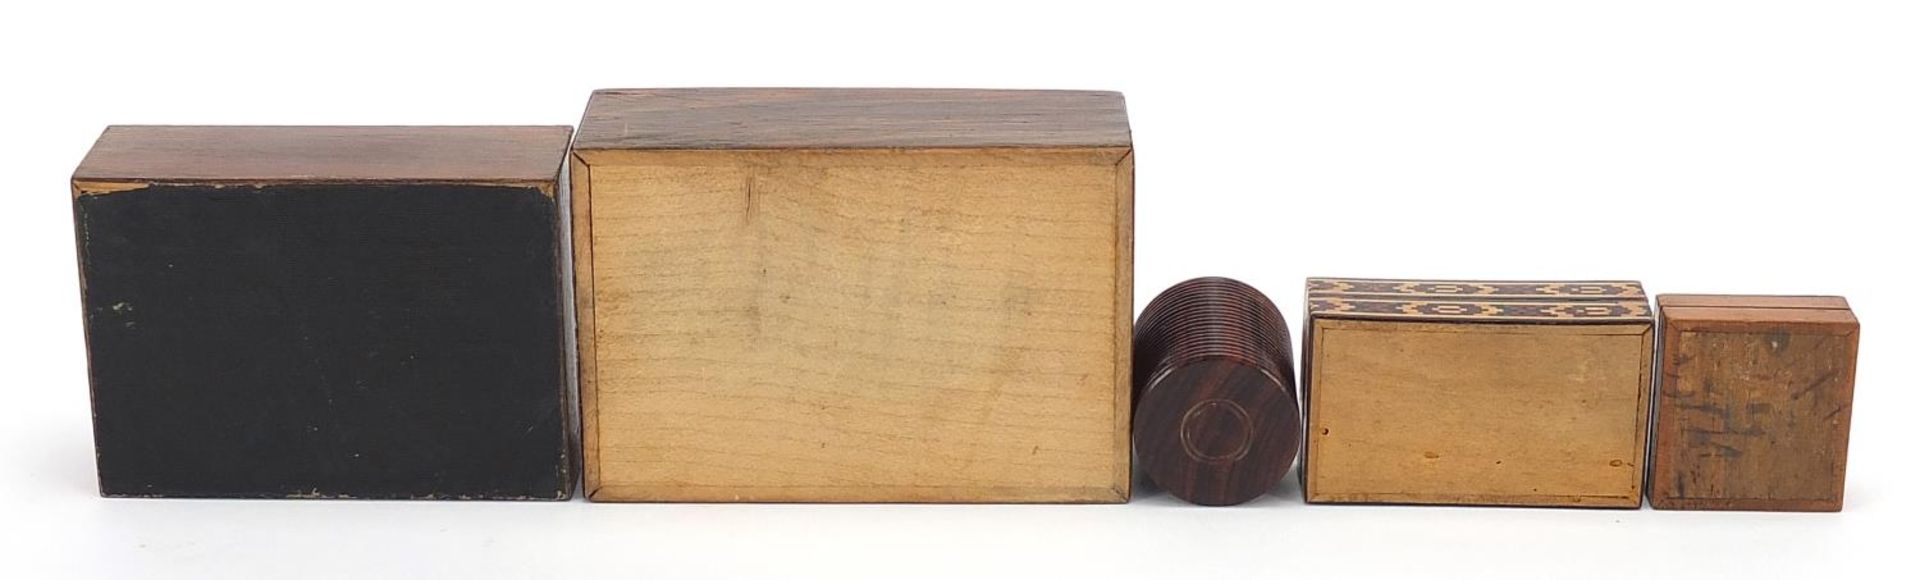 Victorian Tunbridge ware including a rosewood box inlaid with a dog, stamp box with penny red and - Image 3 of 3